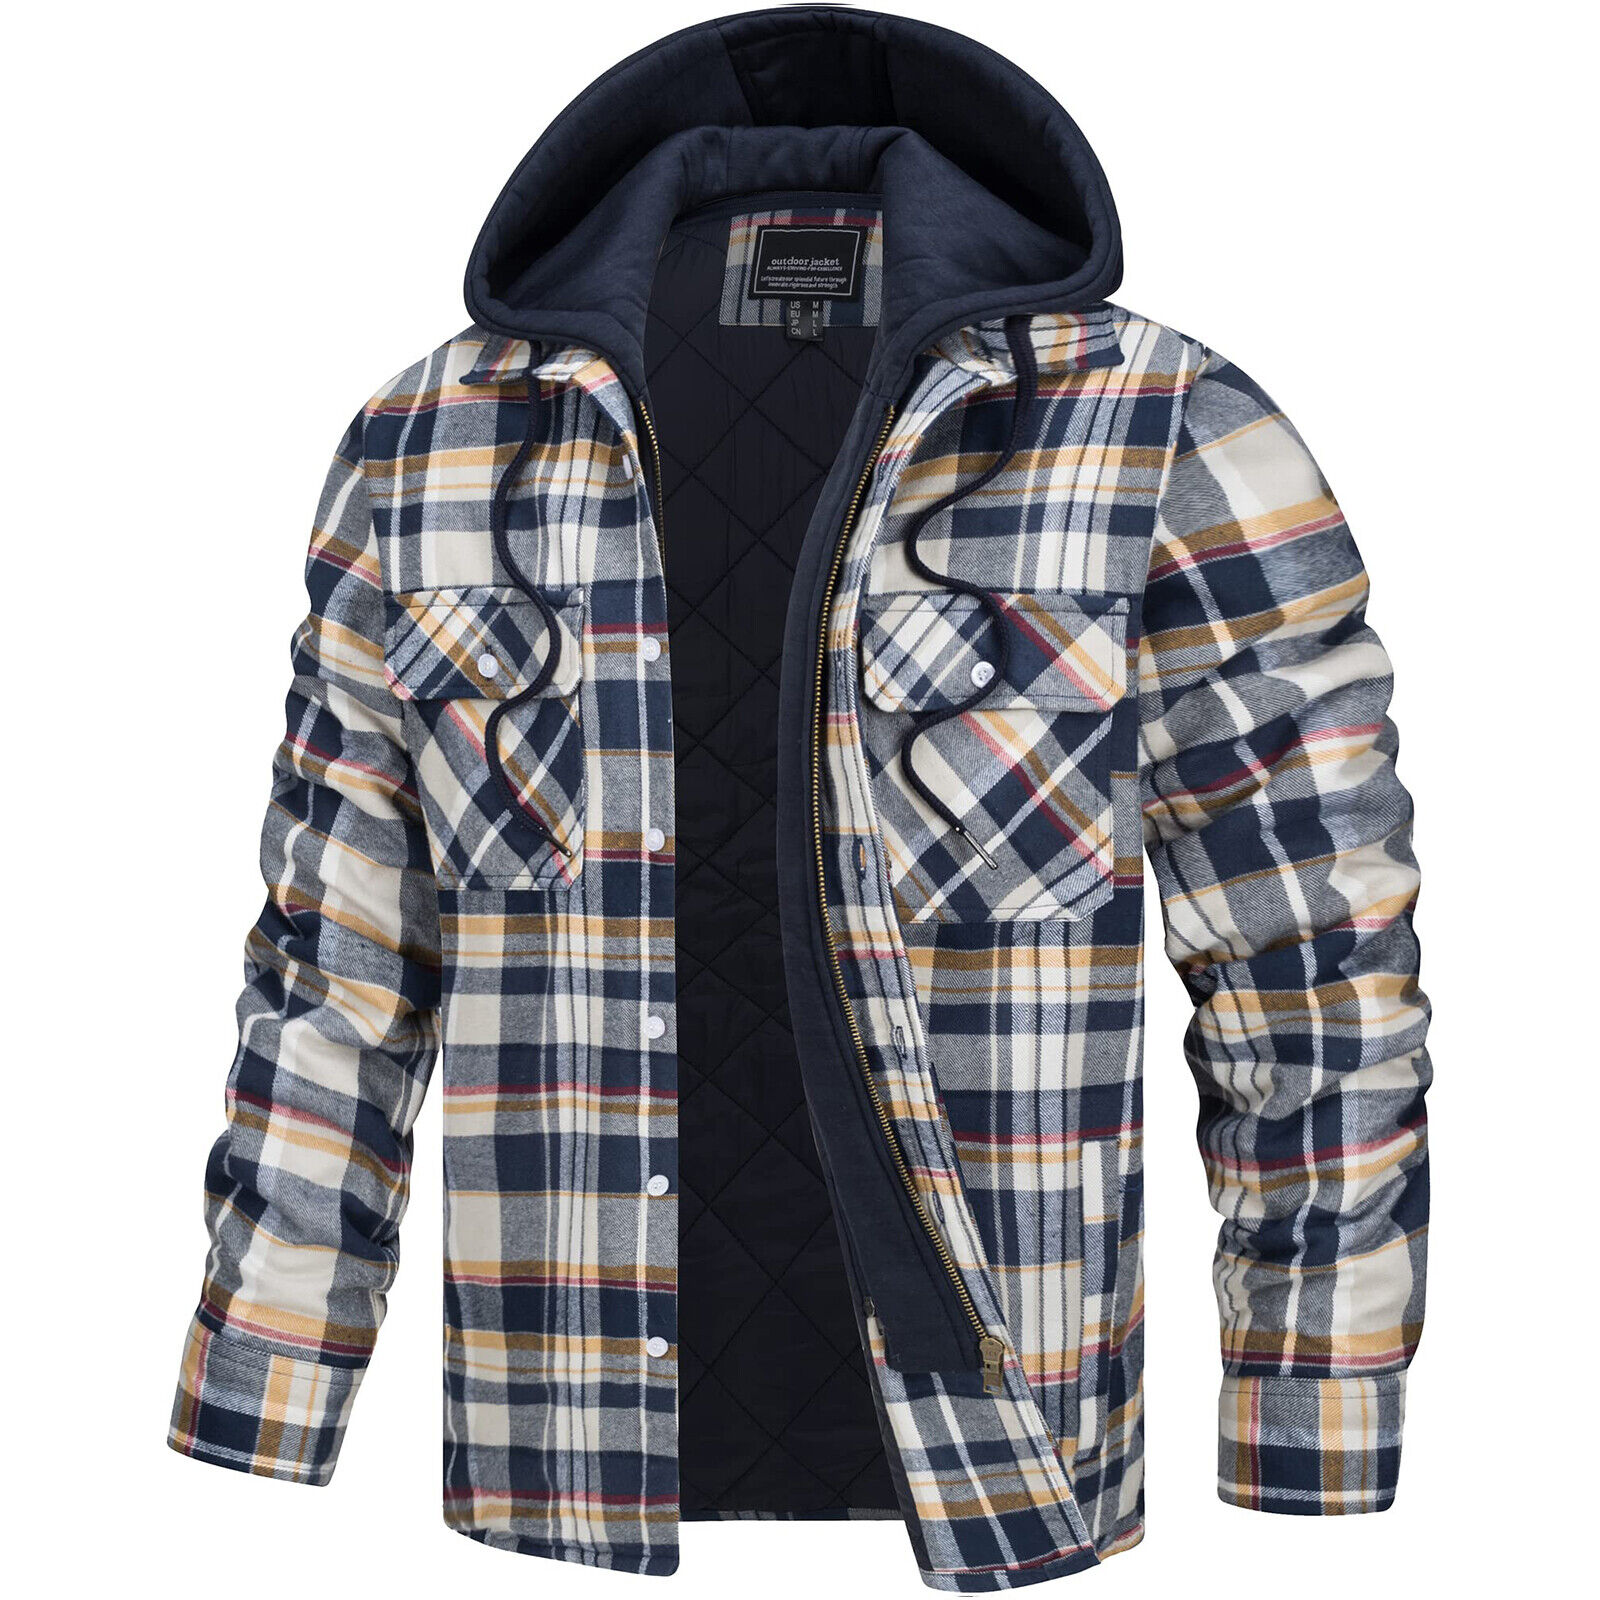 Men's Warm Shirt Jacket Quilted Lined Plaid Flannel Shirt Removeable ...